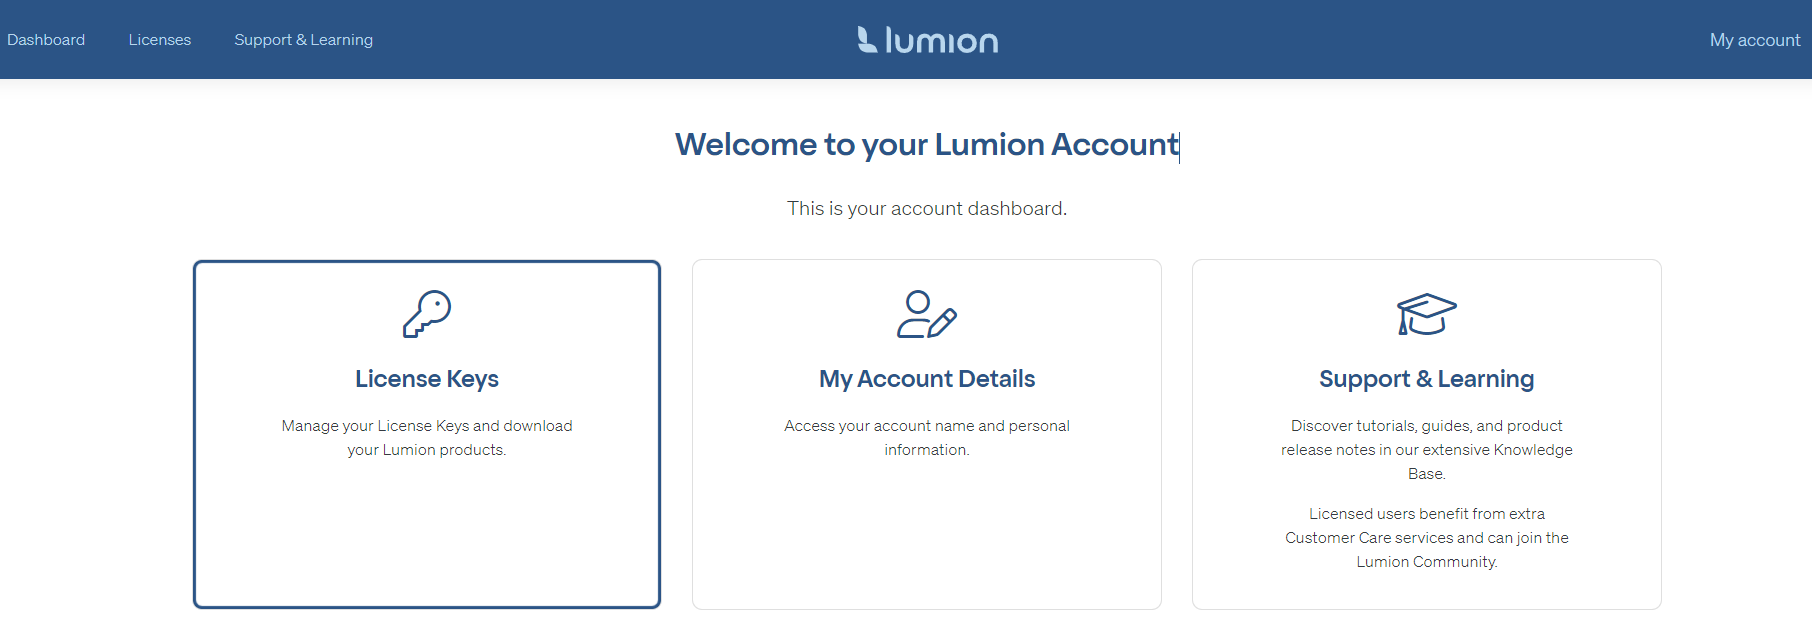 My Lumion Account _Licenses big button.png